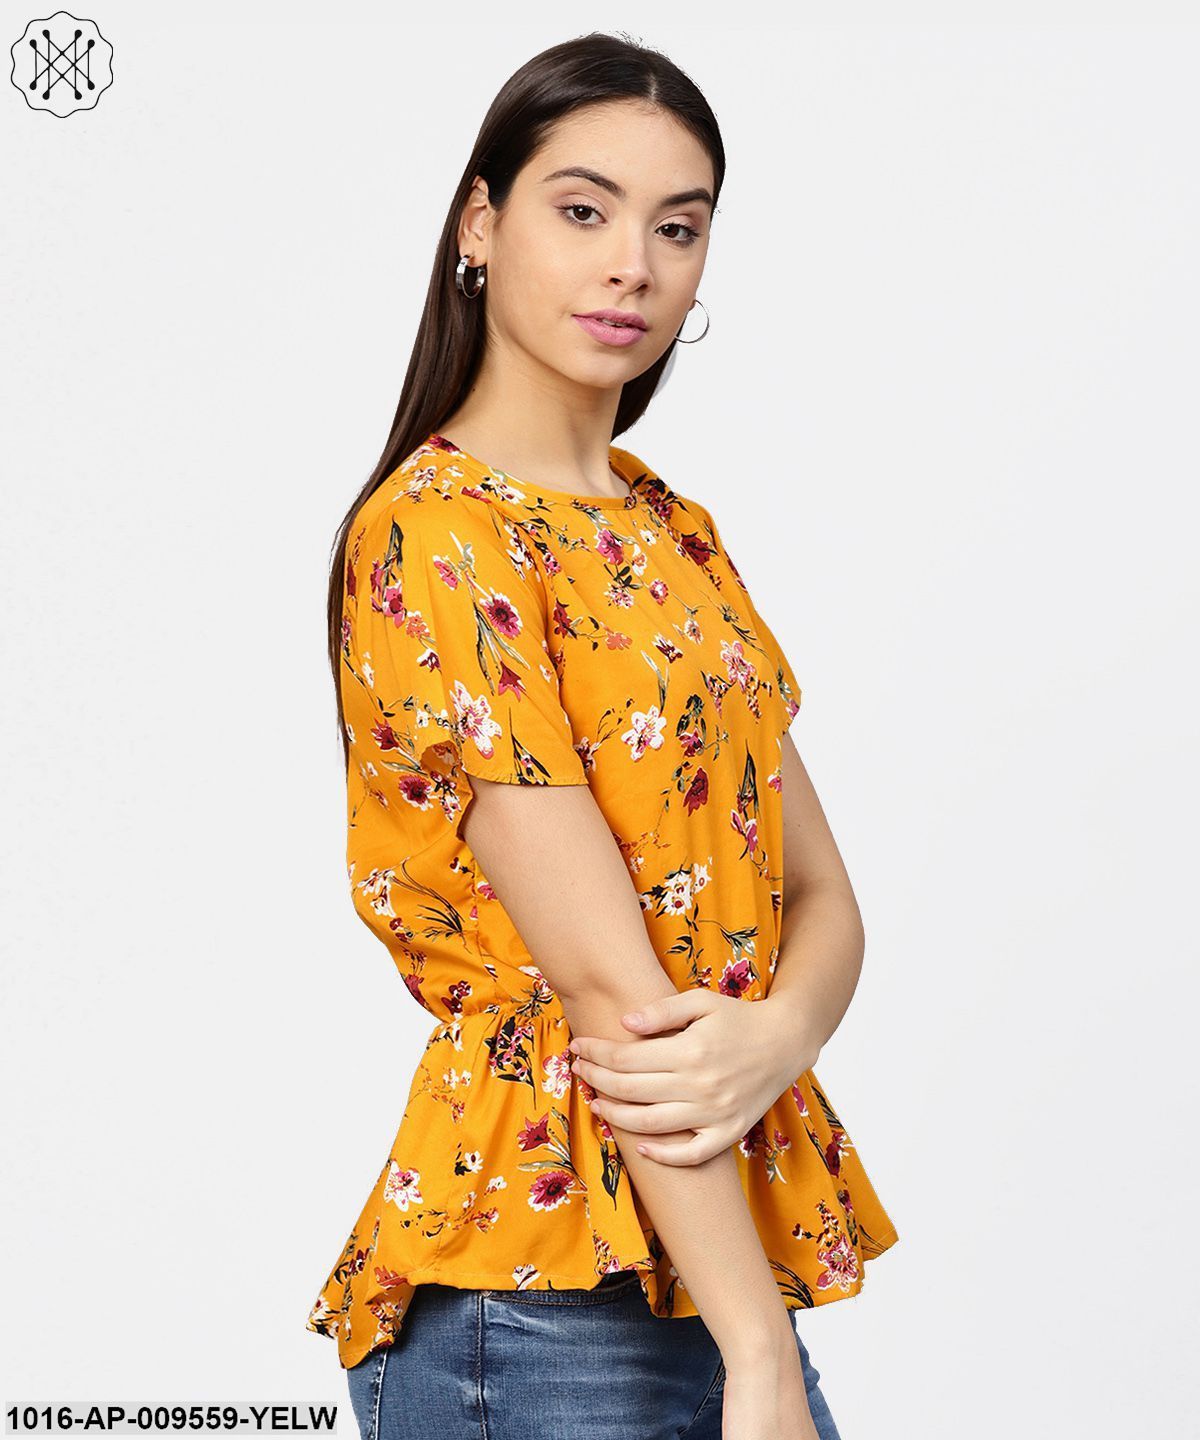 Yellow Printed Short Sleeve With A Gathered Peplum Style Top